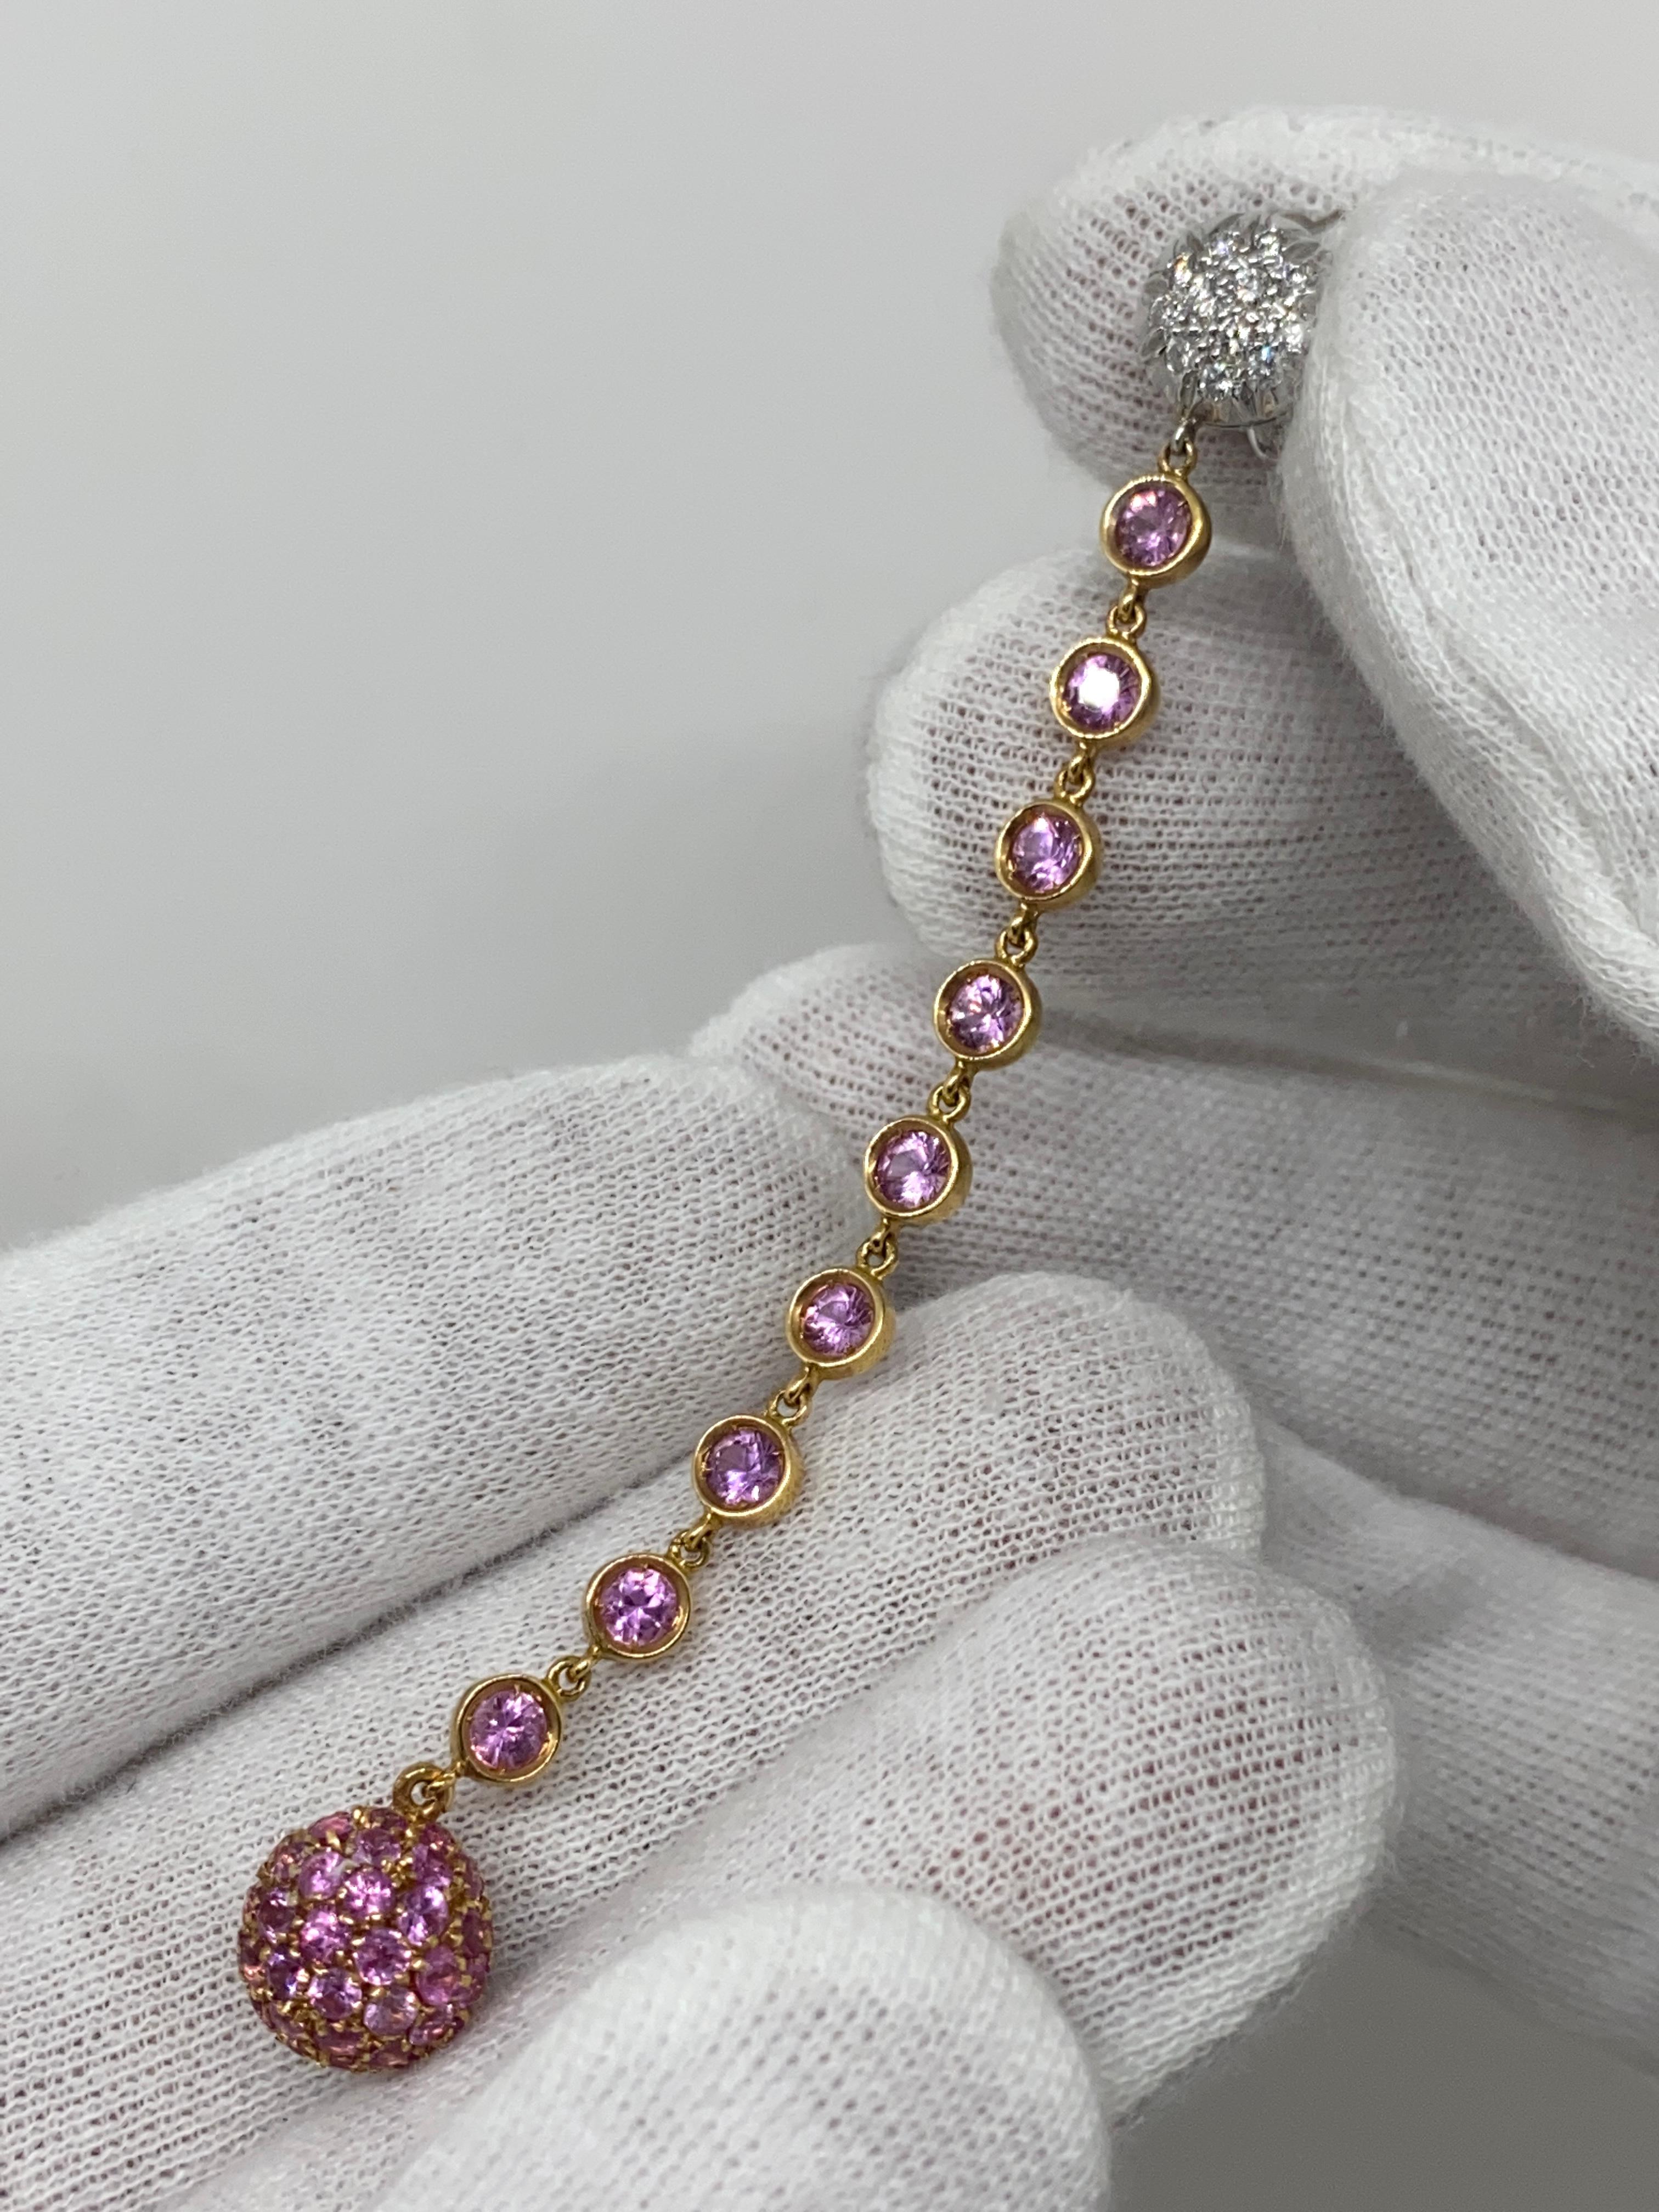 Brilliant Cut 18kt Rose Gold Dangling Earrings Pink Sapphires 4.76 Ct & White Diamonds 0.48 Ct For Sale